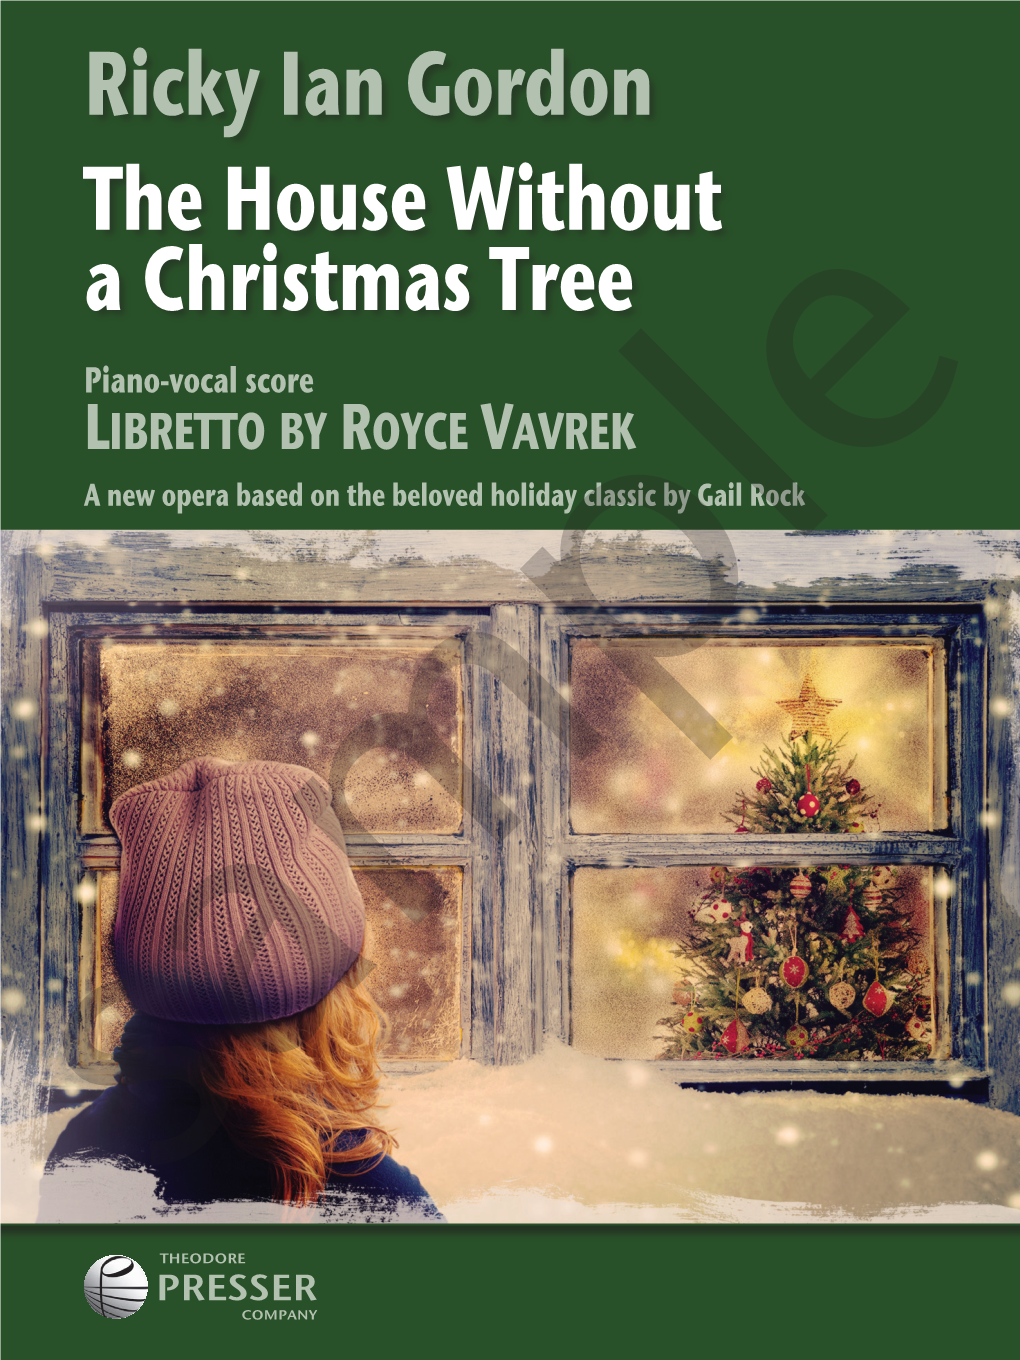 Ricky Ian Gordon the House Without a Christmas Tree Piano-Vocal Score Libretto by Royce Vavrek a New Opera Based on the Beloved Holiday Classic by Gail Rock